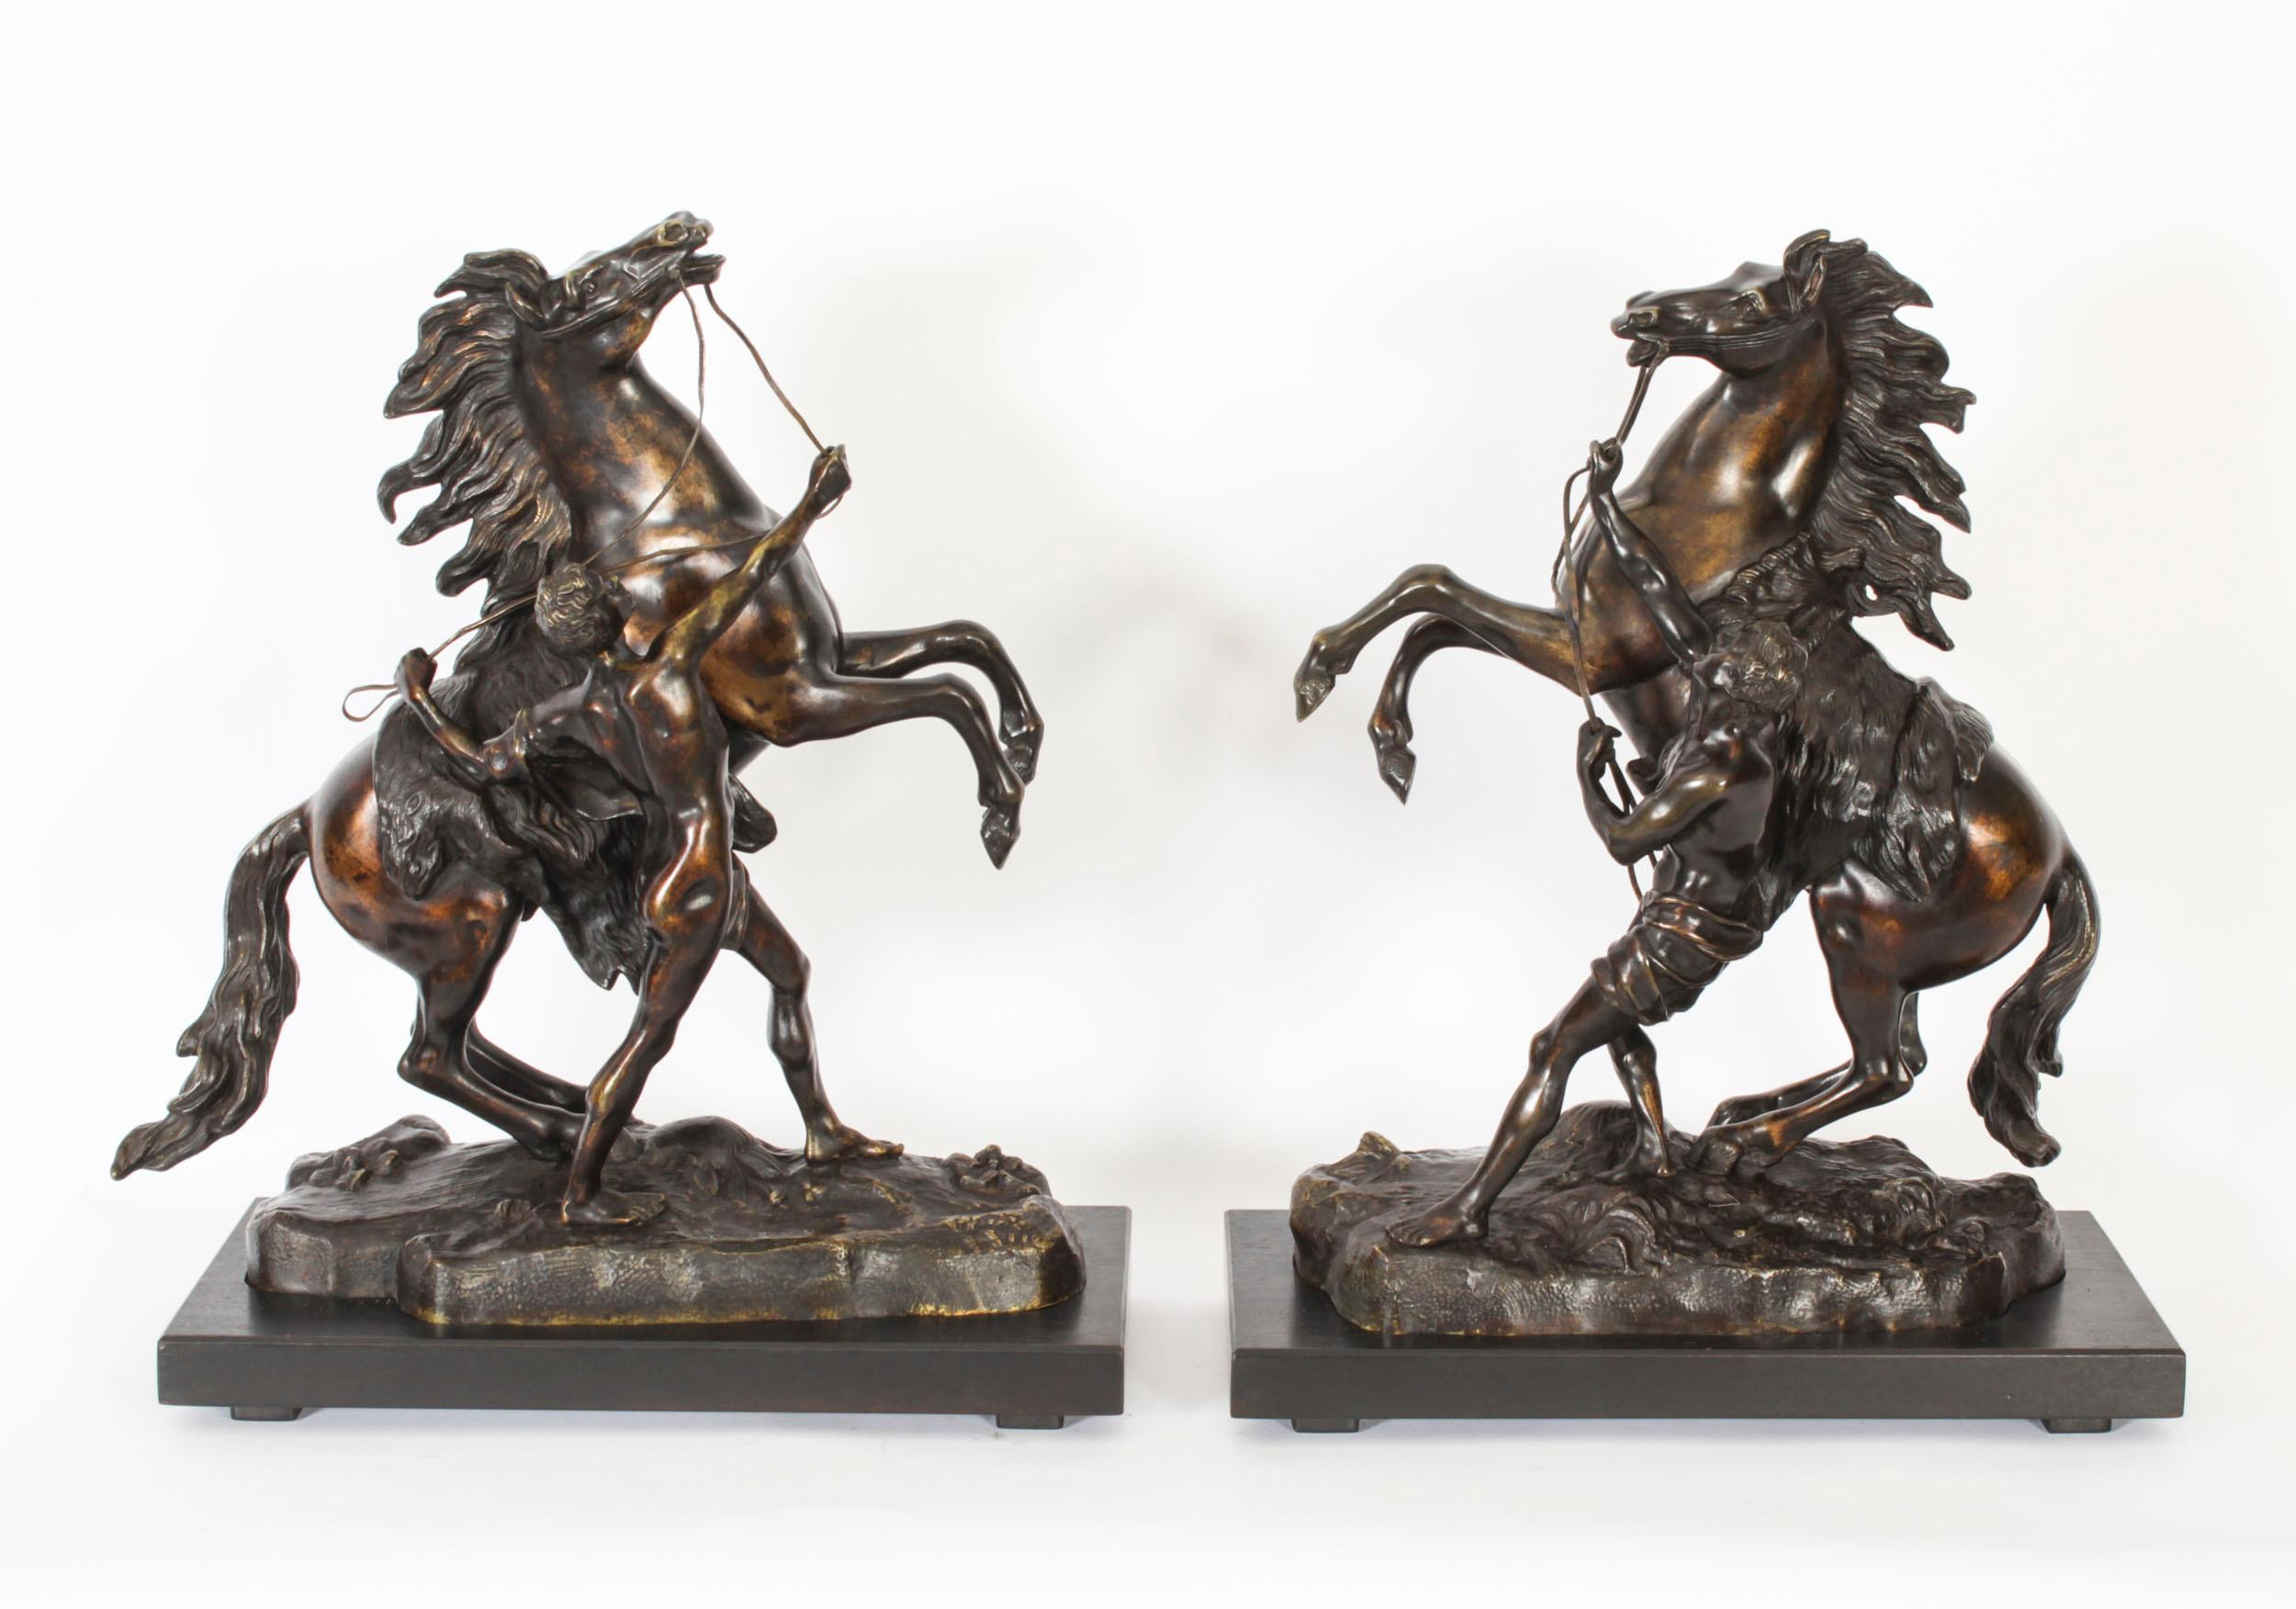 Antique Pair of French Bronze Marly Horses Sculptures by Cousteau 19th Century For Sale 14